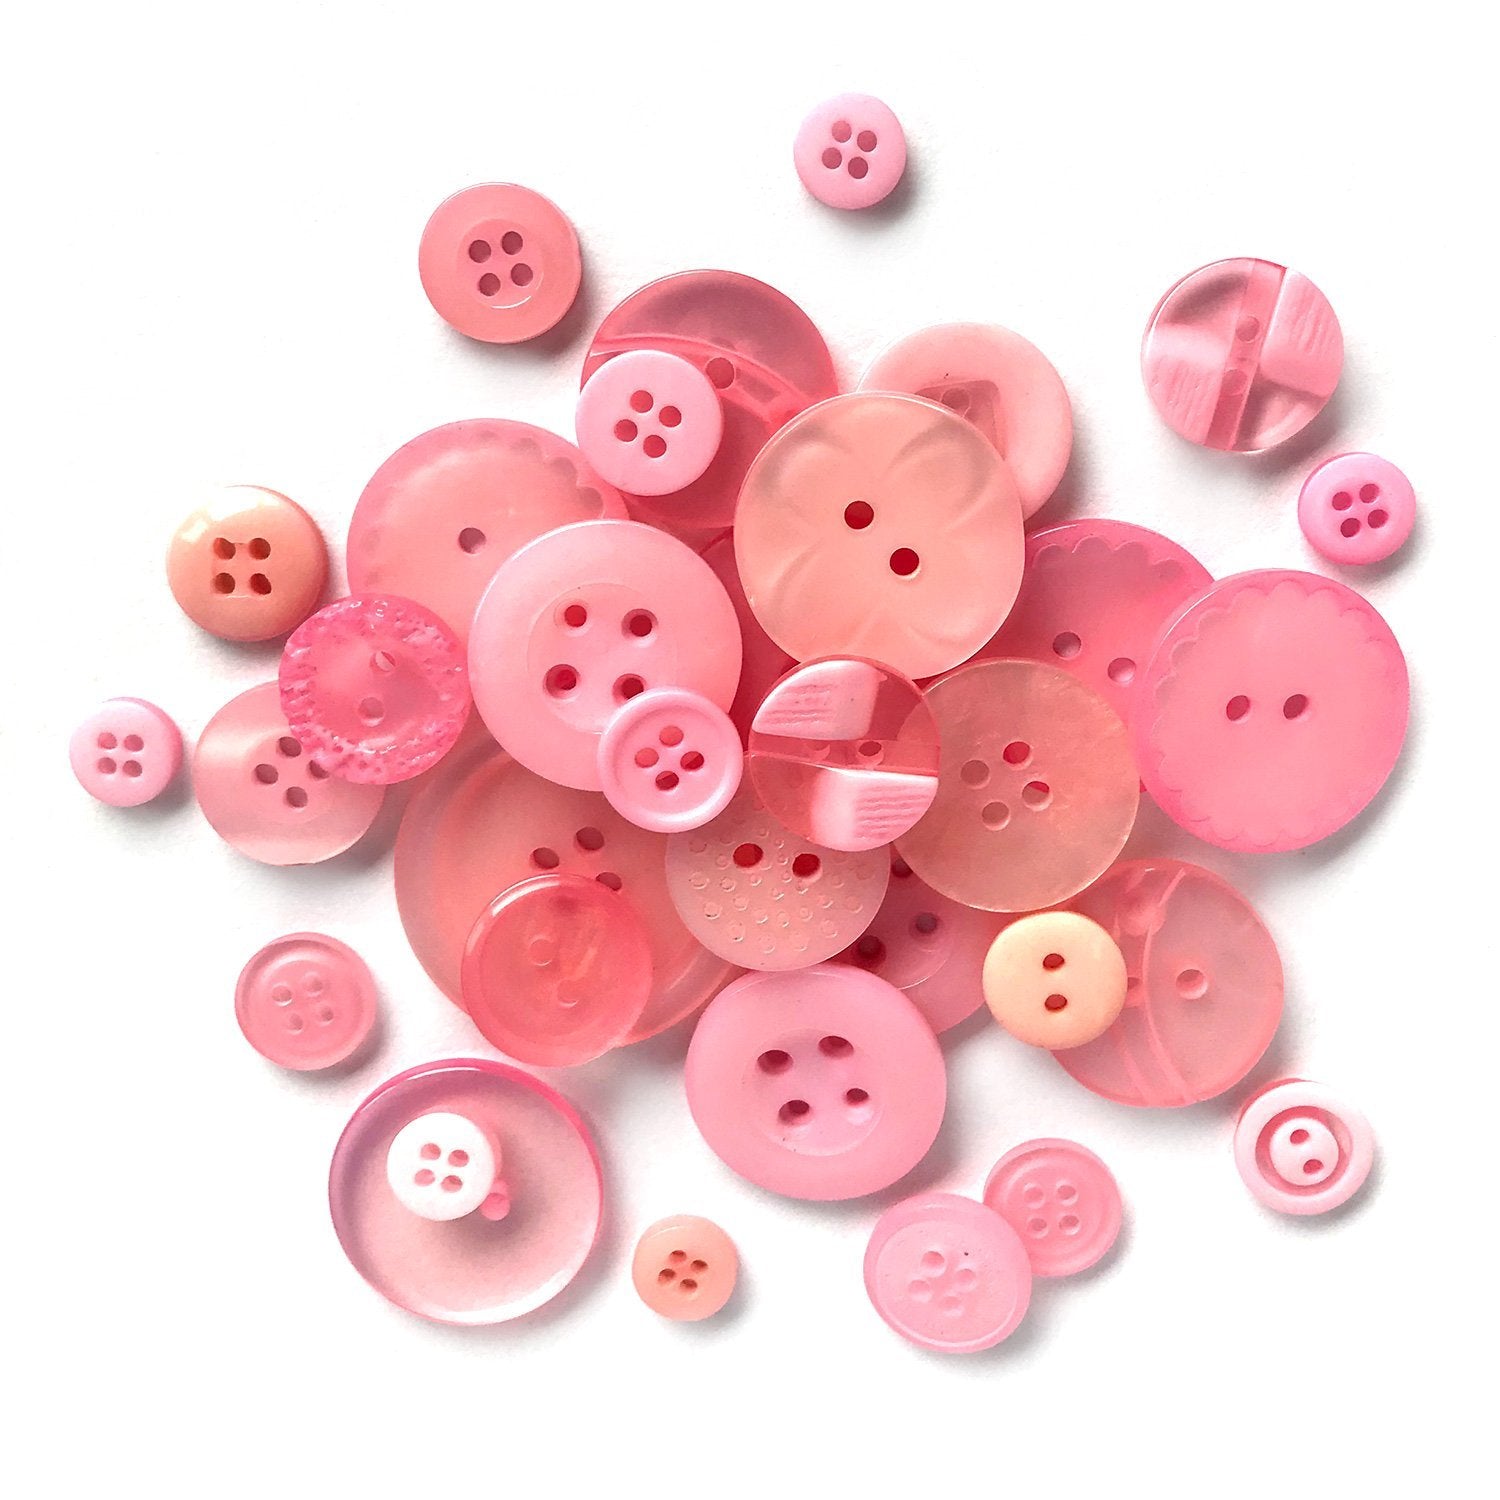 Basic hot pink buttons